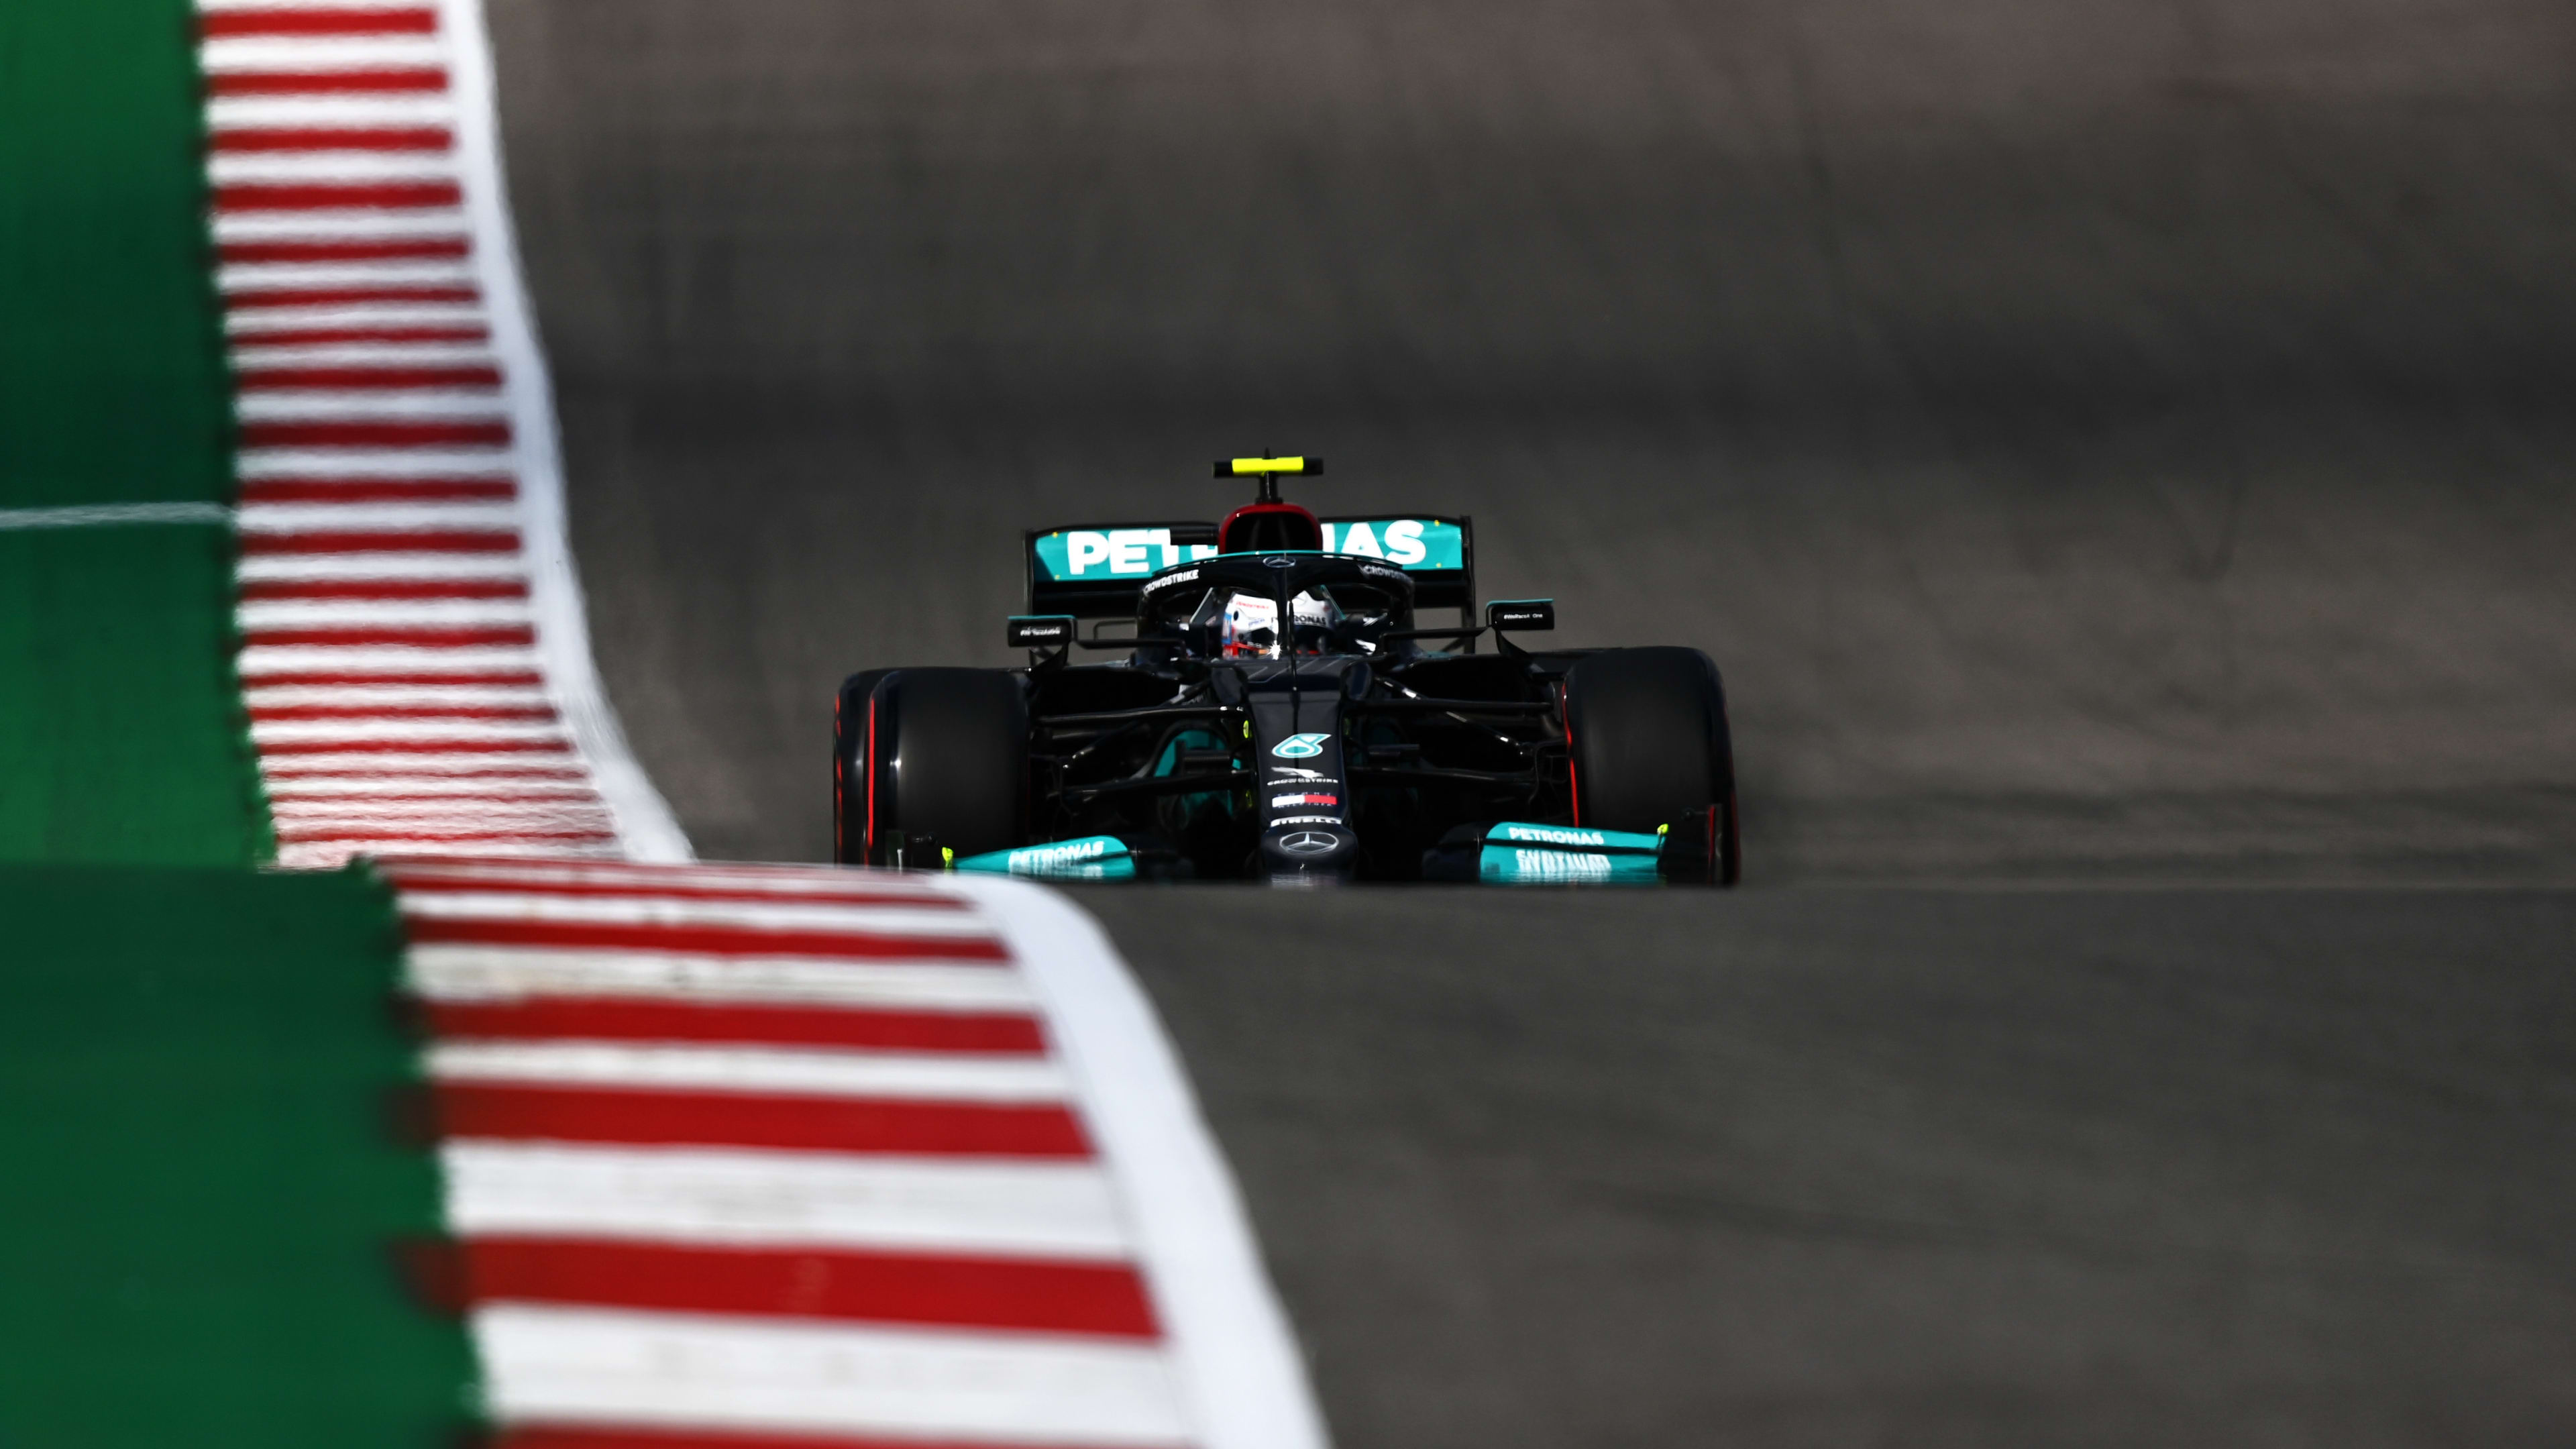 2021 United States Grand Prix FP1 report and highlights Bottas leads Hamilton and Verstappen in opening practice session at COTA Formula 1®